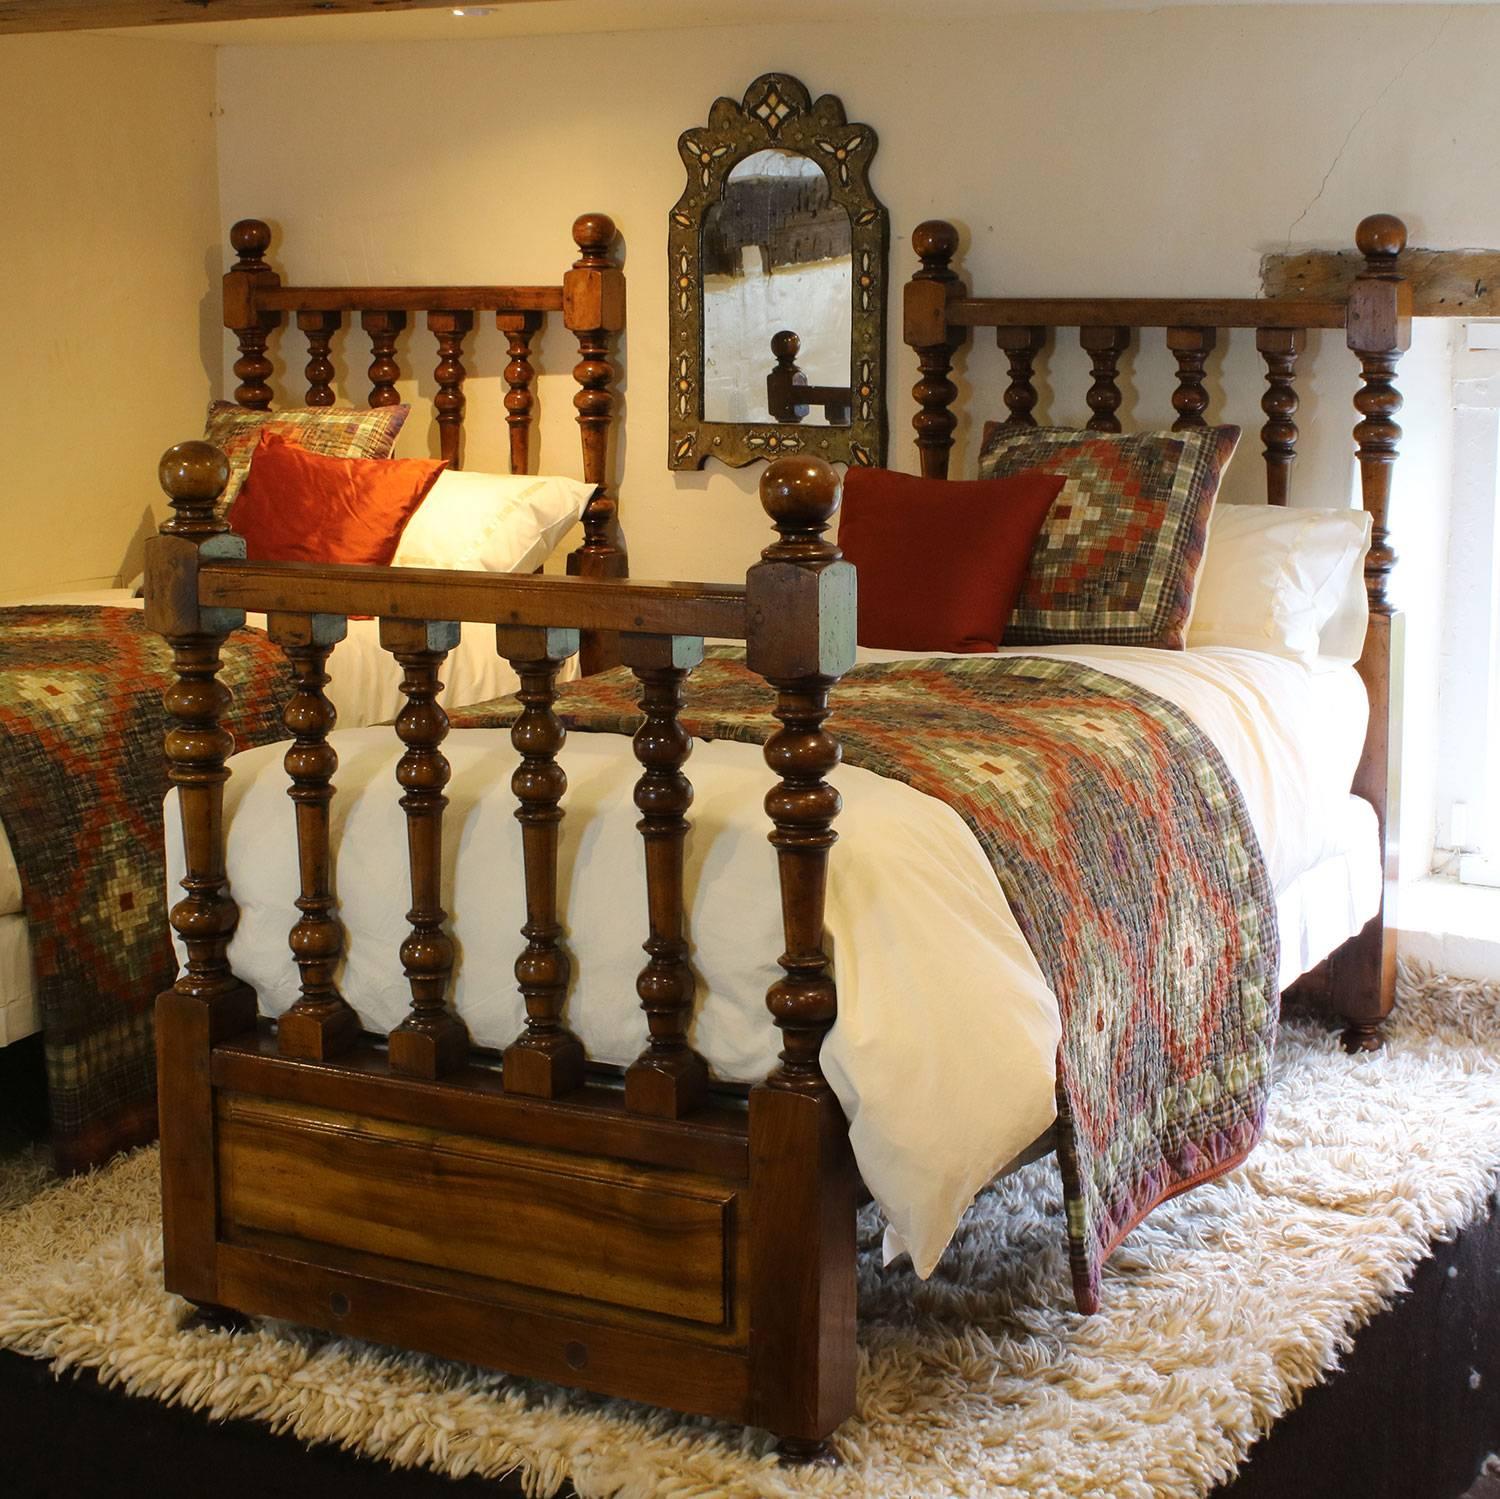 An unusual matching pair of beds with spindle decoration in head and foot boards.

These beds accept 3ft wide bases and mattresses.

The price is for the bed frames alone. The bases, mattresses, bedding and linen are extra and can be provided.